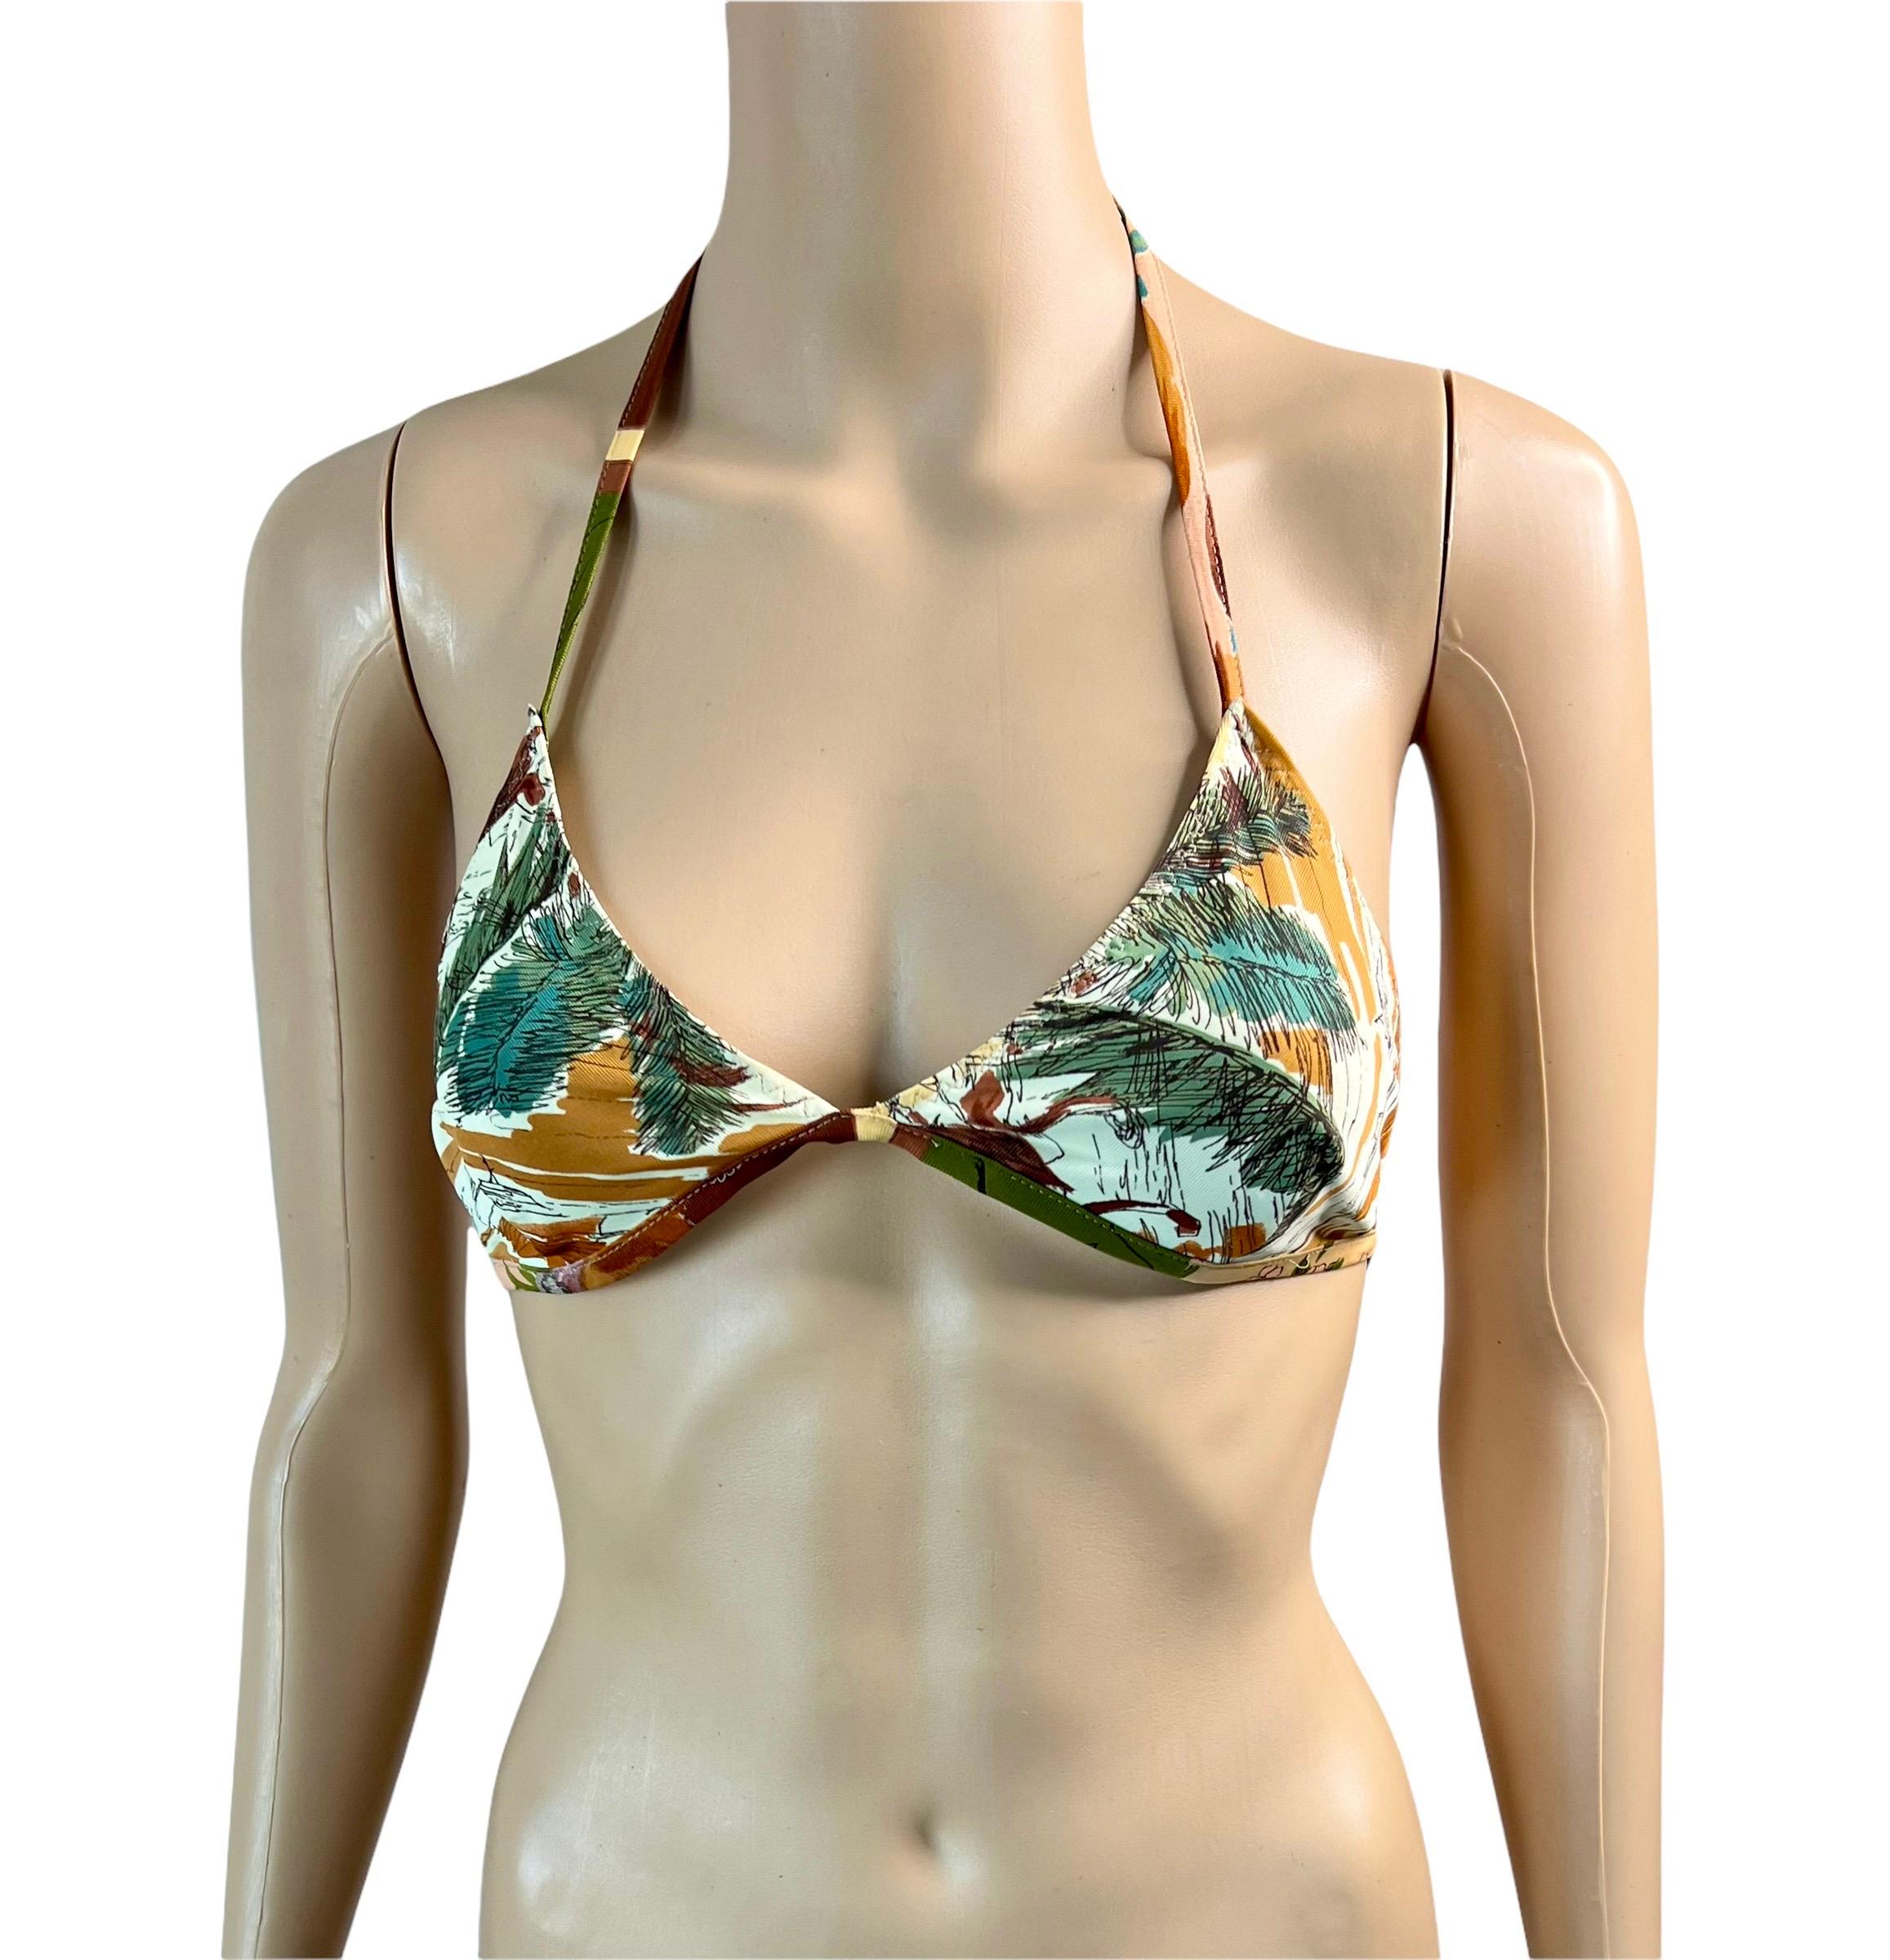 Jean Paul Gaultier S/S 2001 Abstract Floral Print Bra and Maxi Dress 2 Piece Set 2